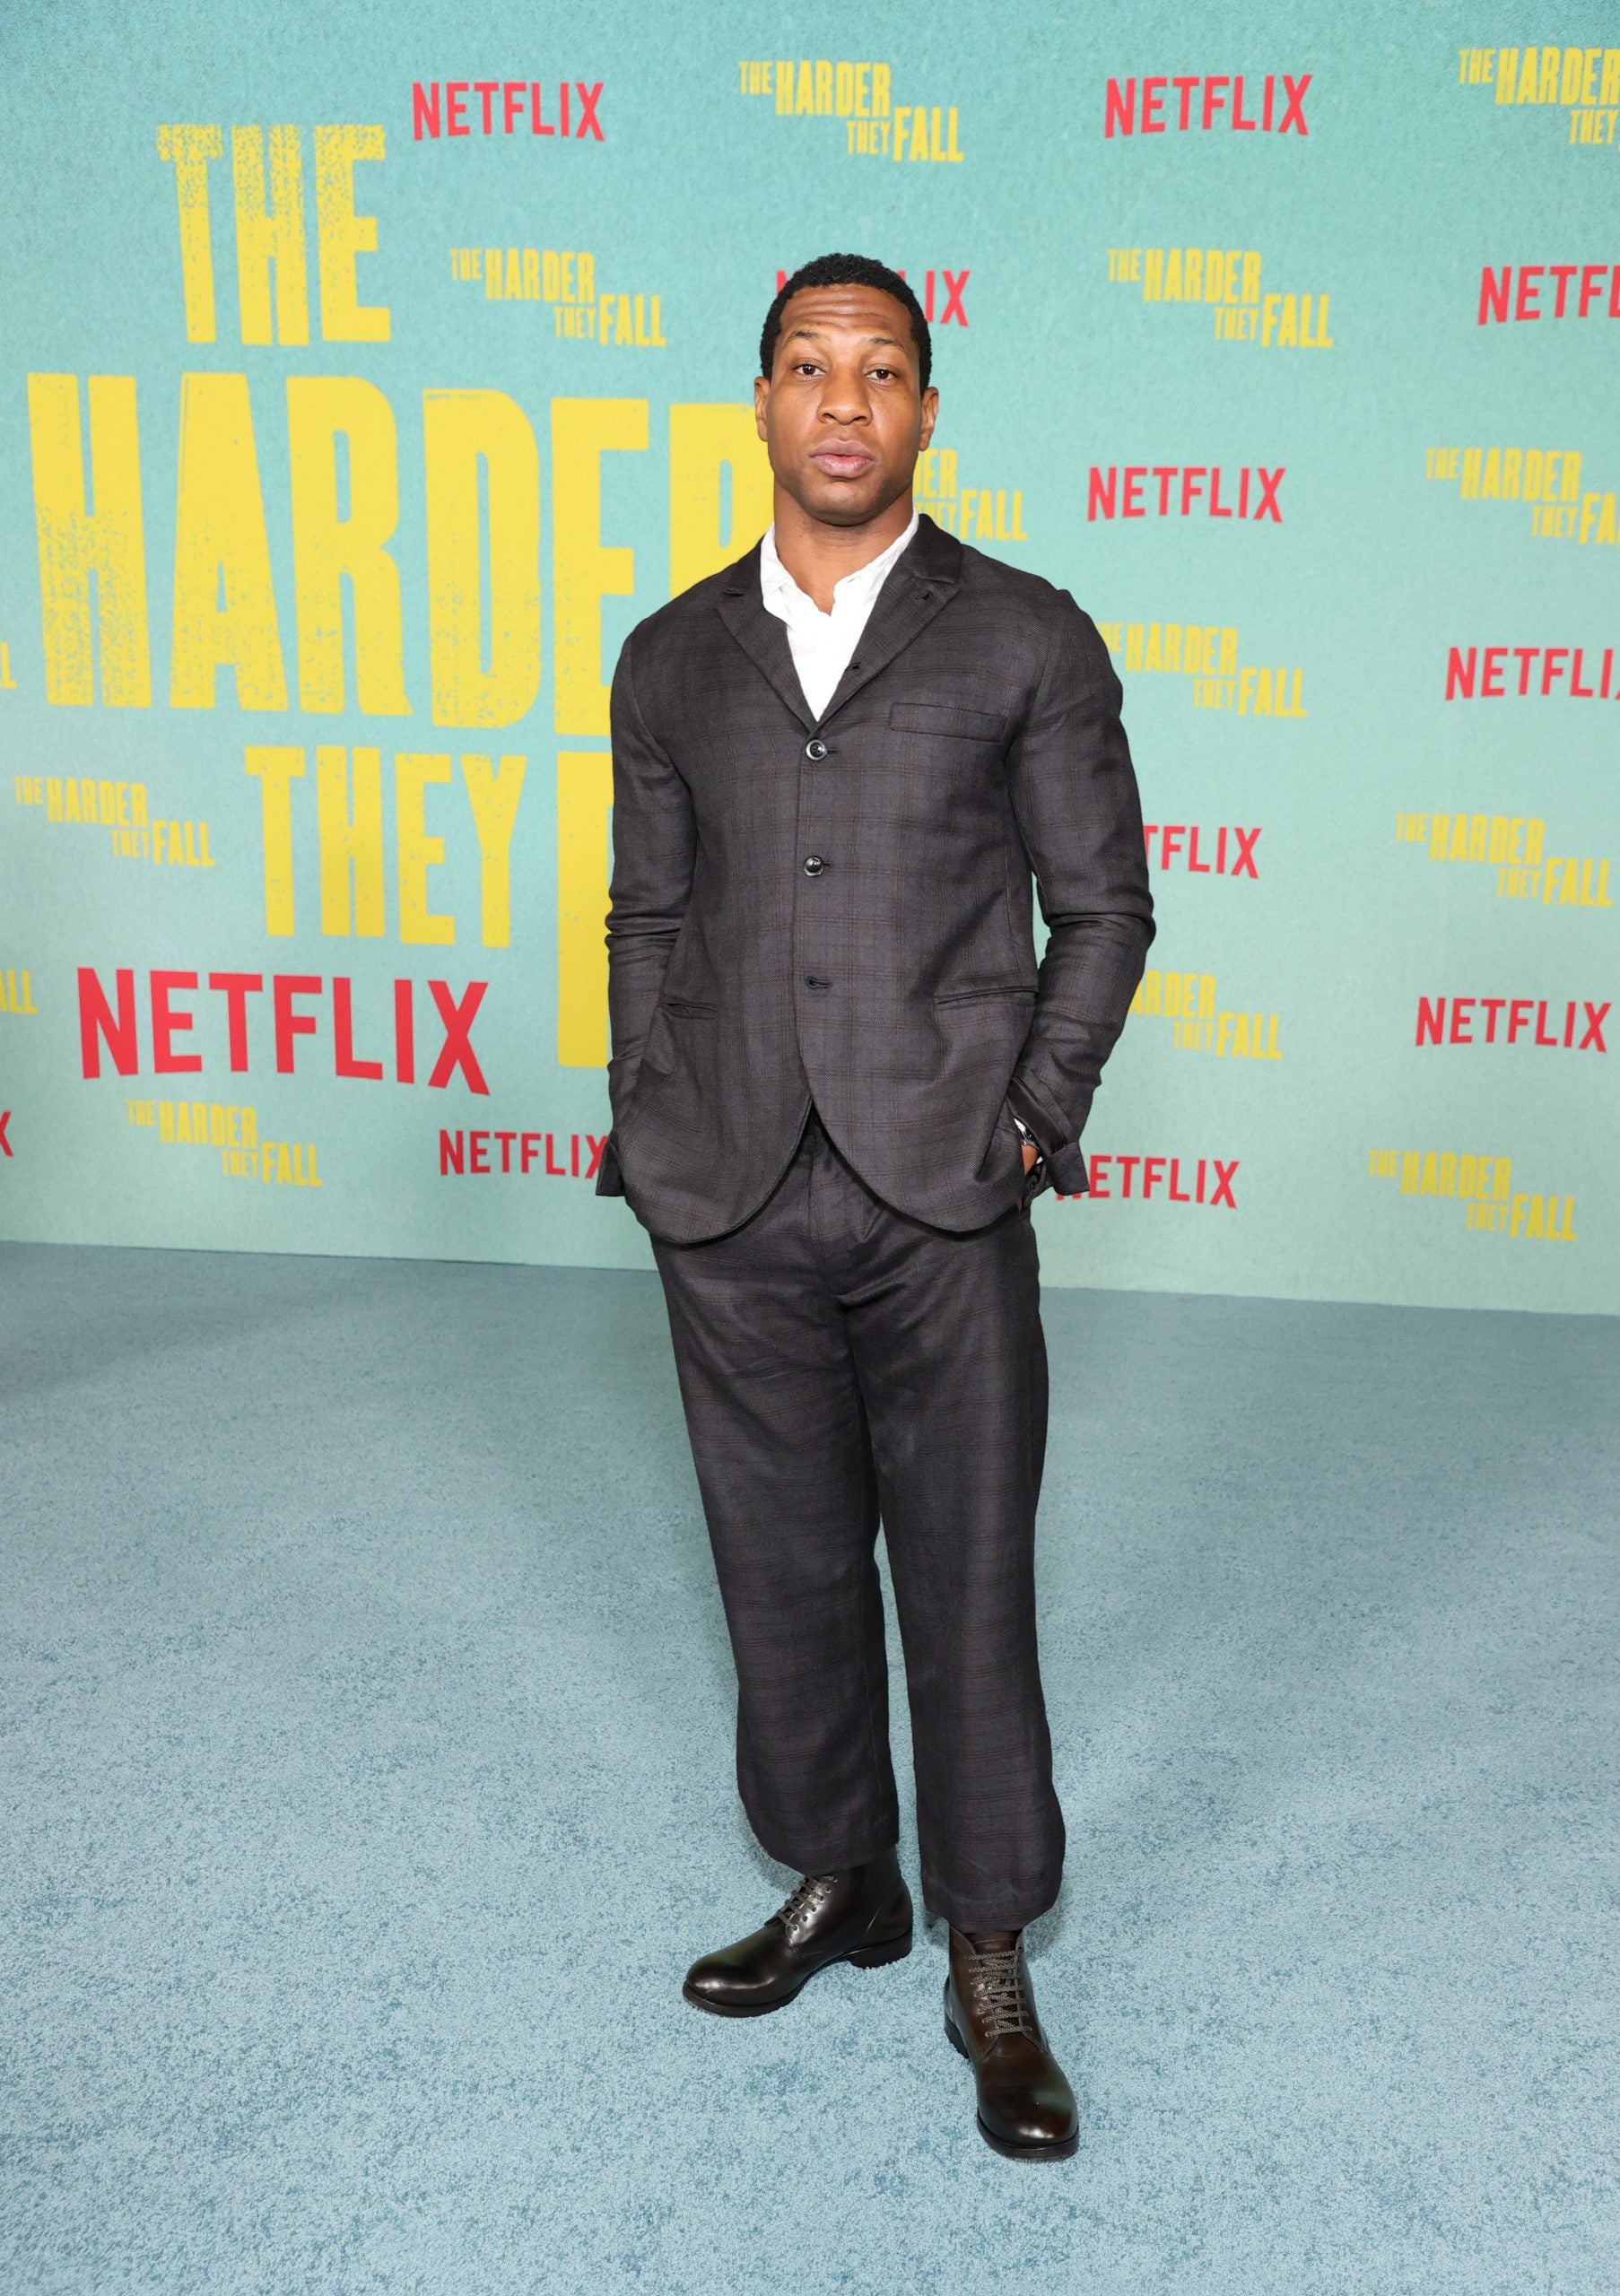 Everybody Came Out For The Premiere of 'The Harder They Fall' In LA Last Night